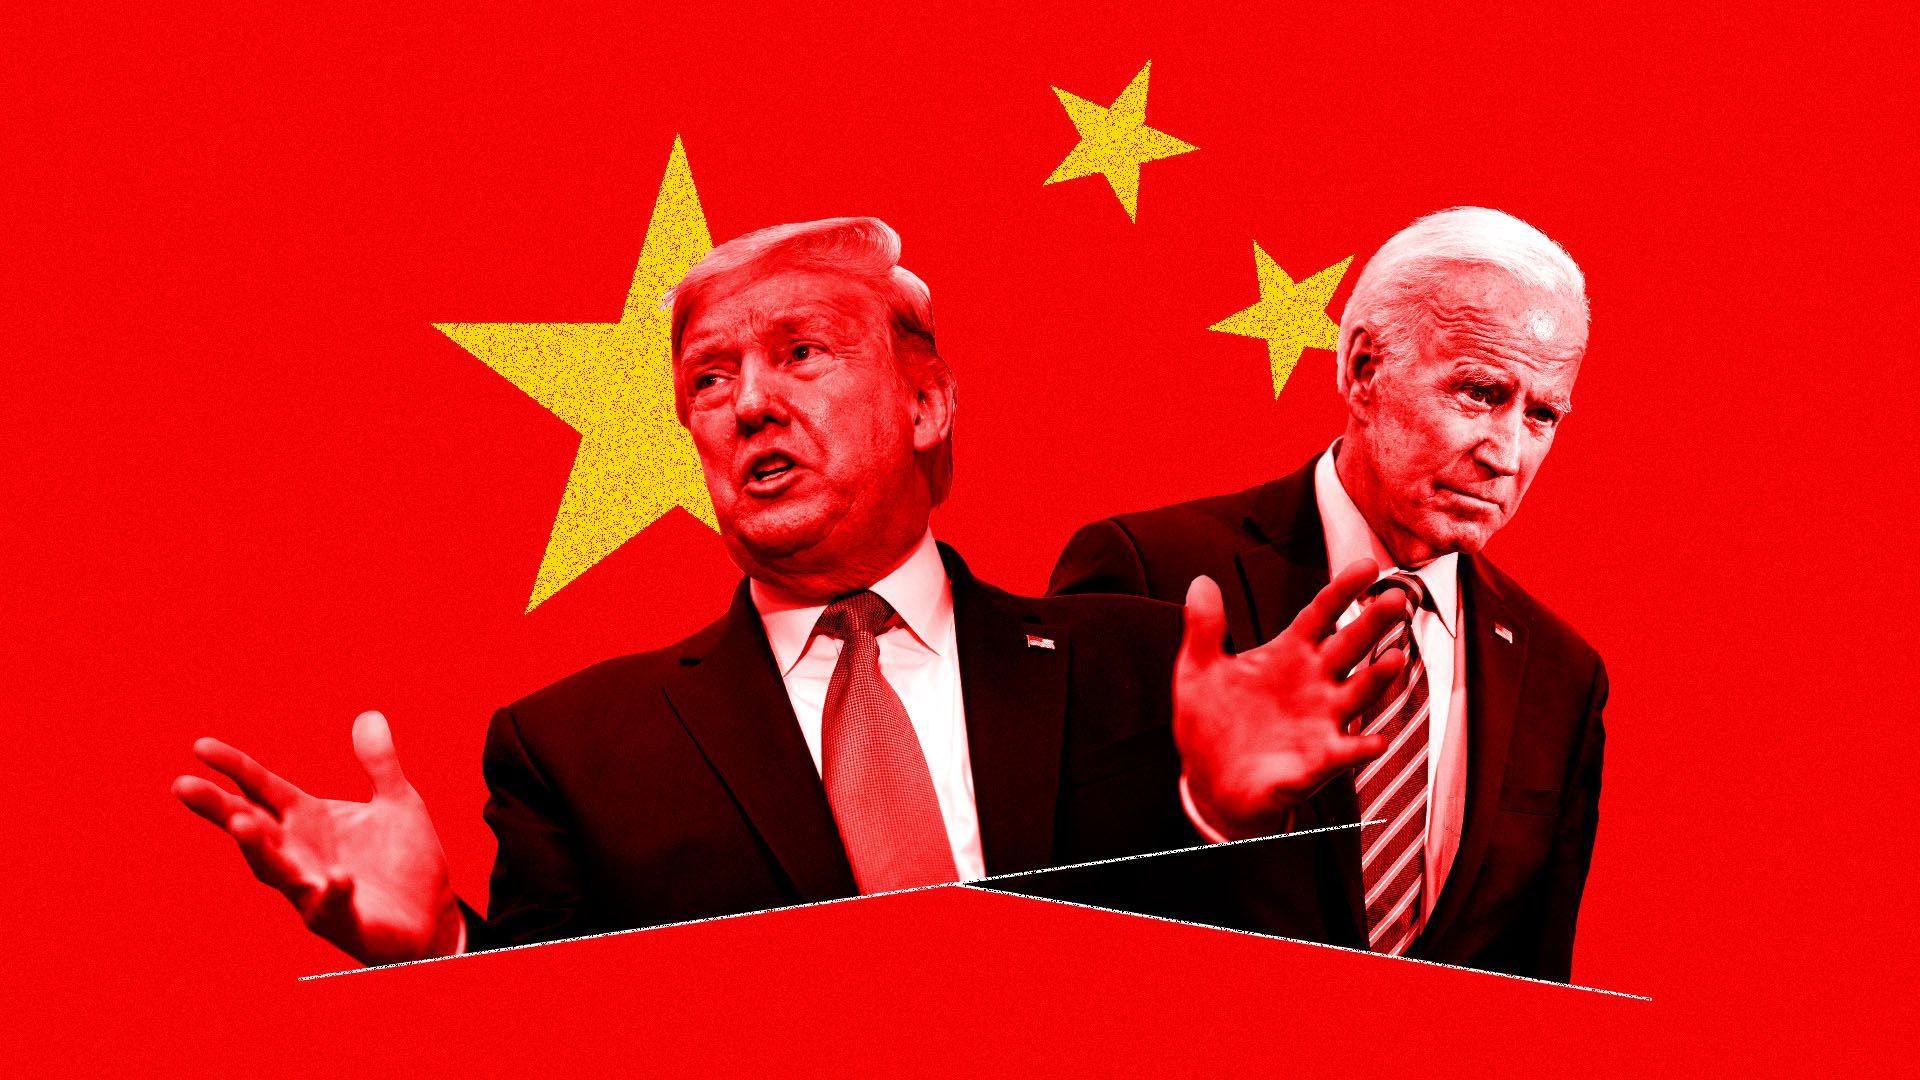 Illustrated collage of President Trump and Joe Biden against the Chinese flag